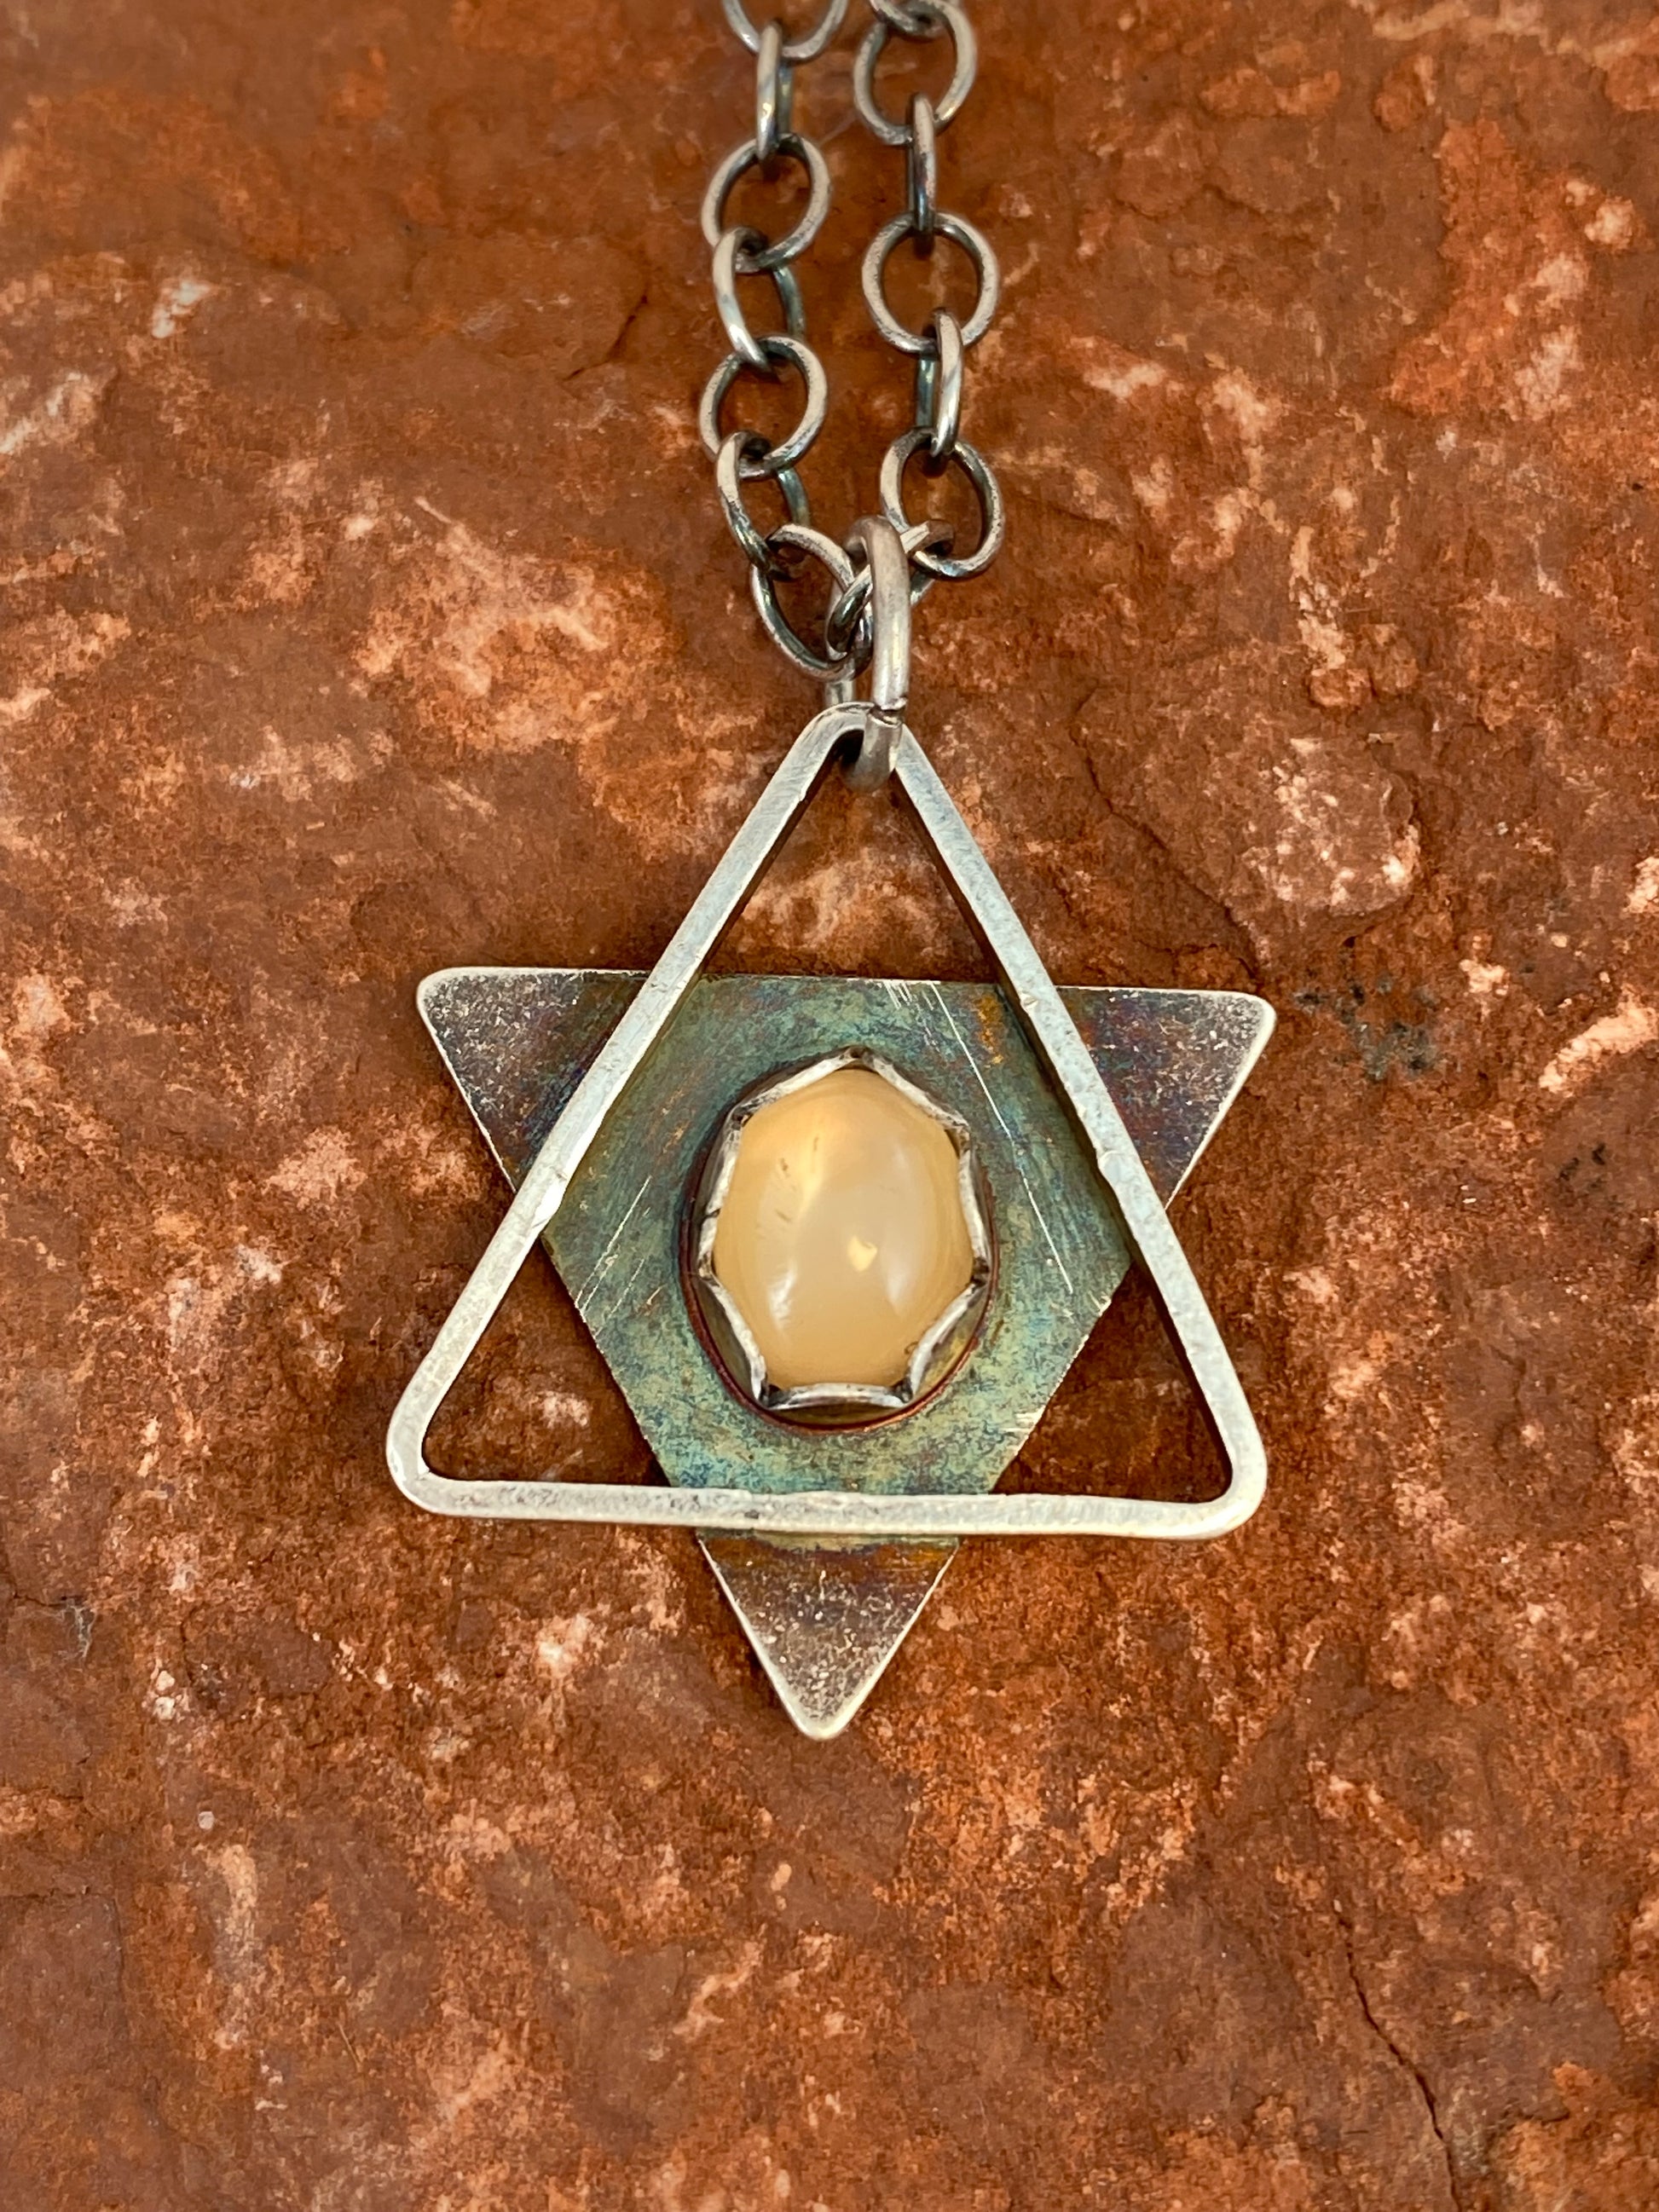 * Handmade Magen David (Star of David) necklace, sterling silver with sunstone.